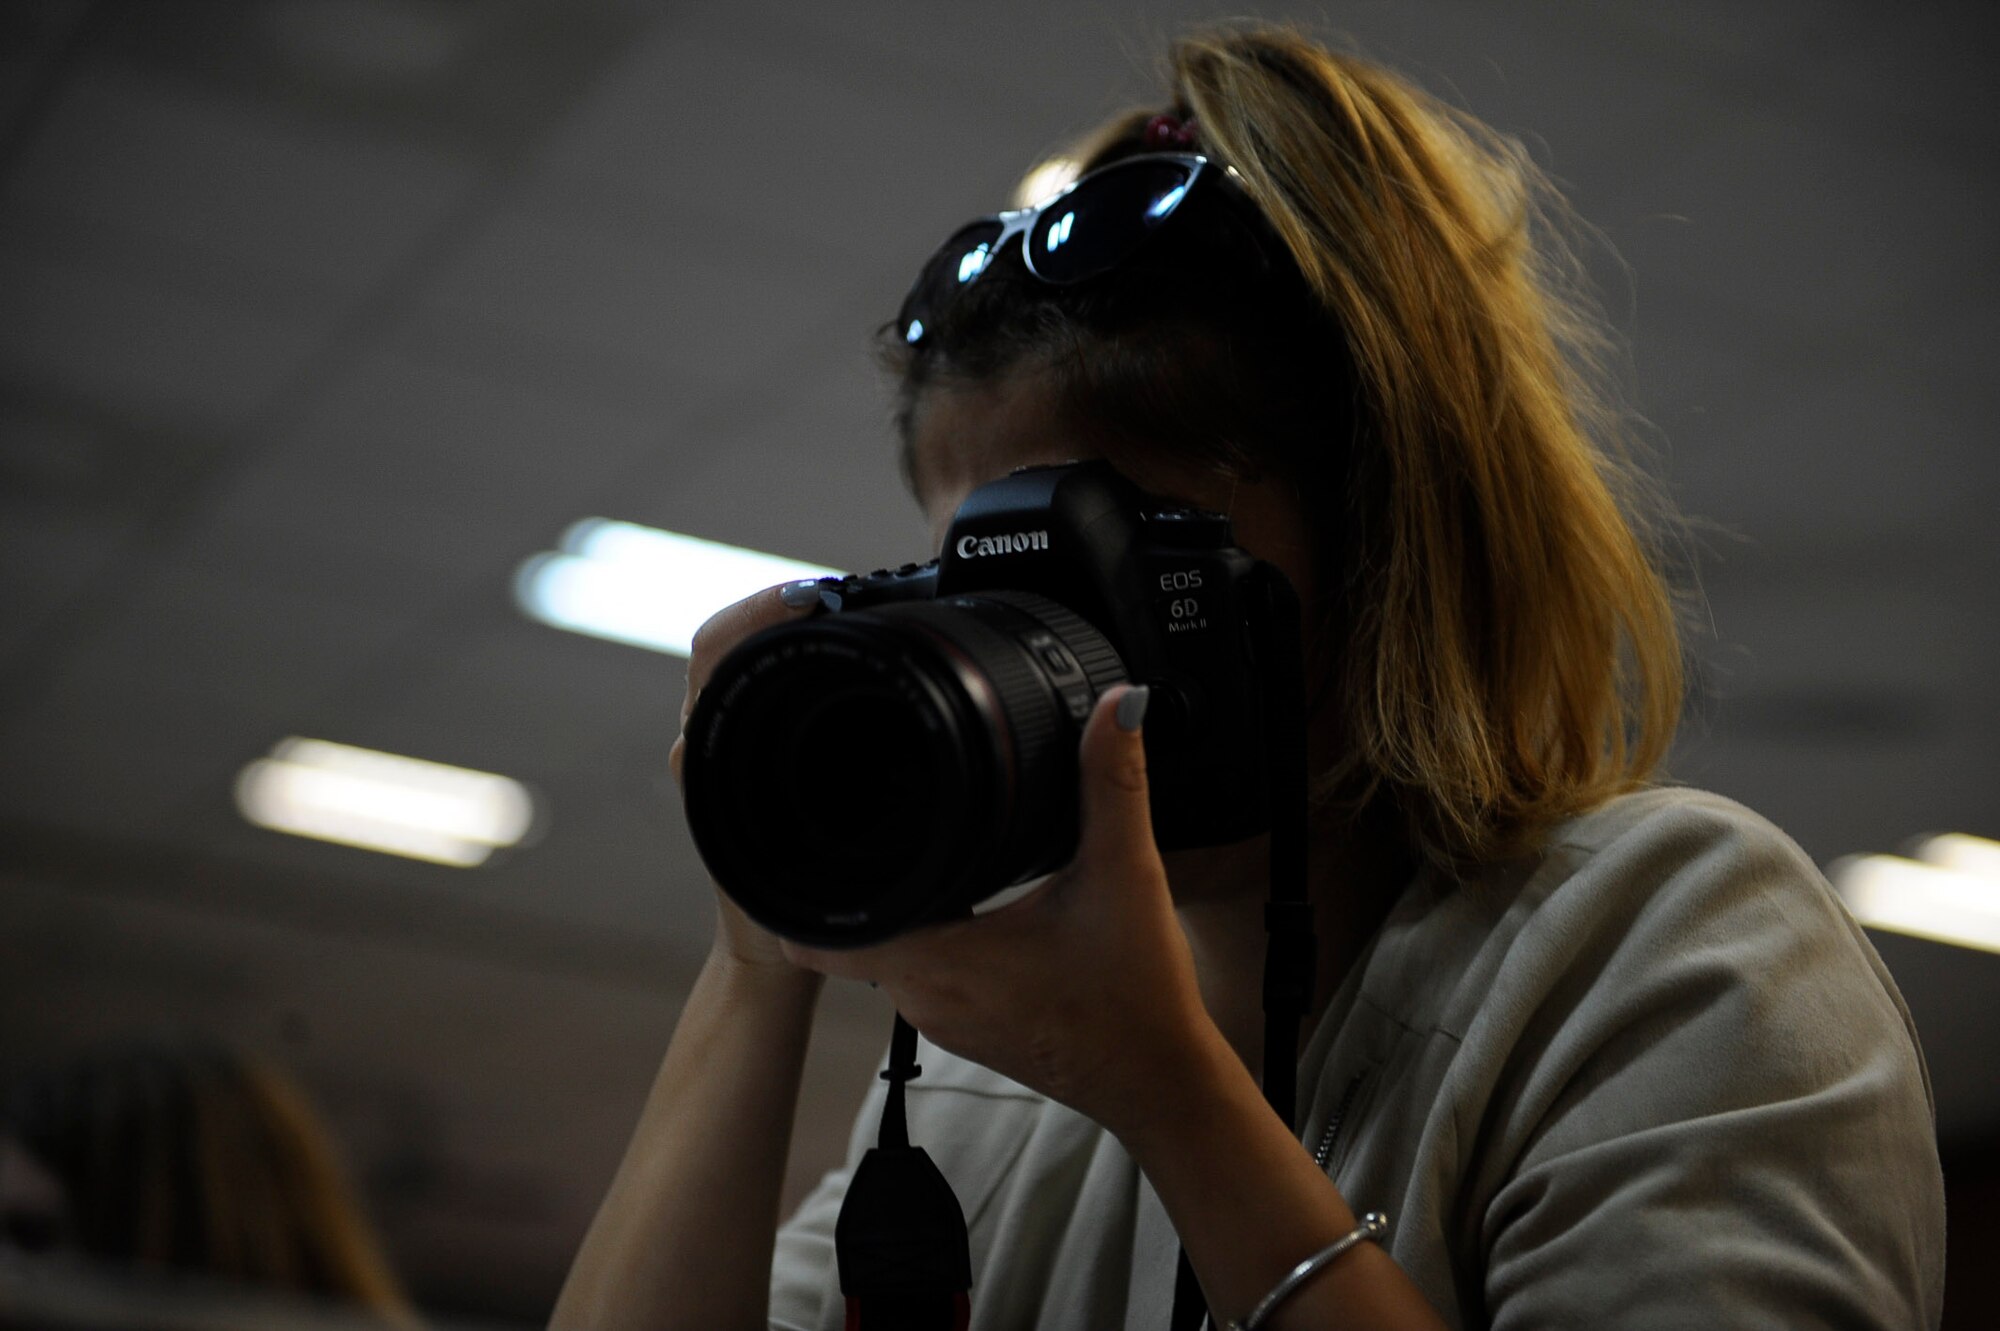 The Ramstein Community Center offers a four-week photography course for both amateur and enthusiast photographers.